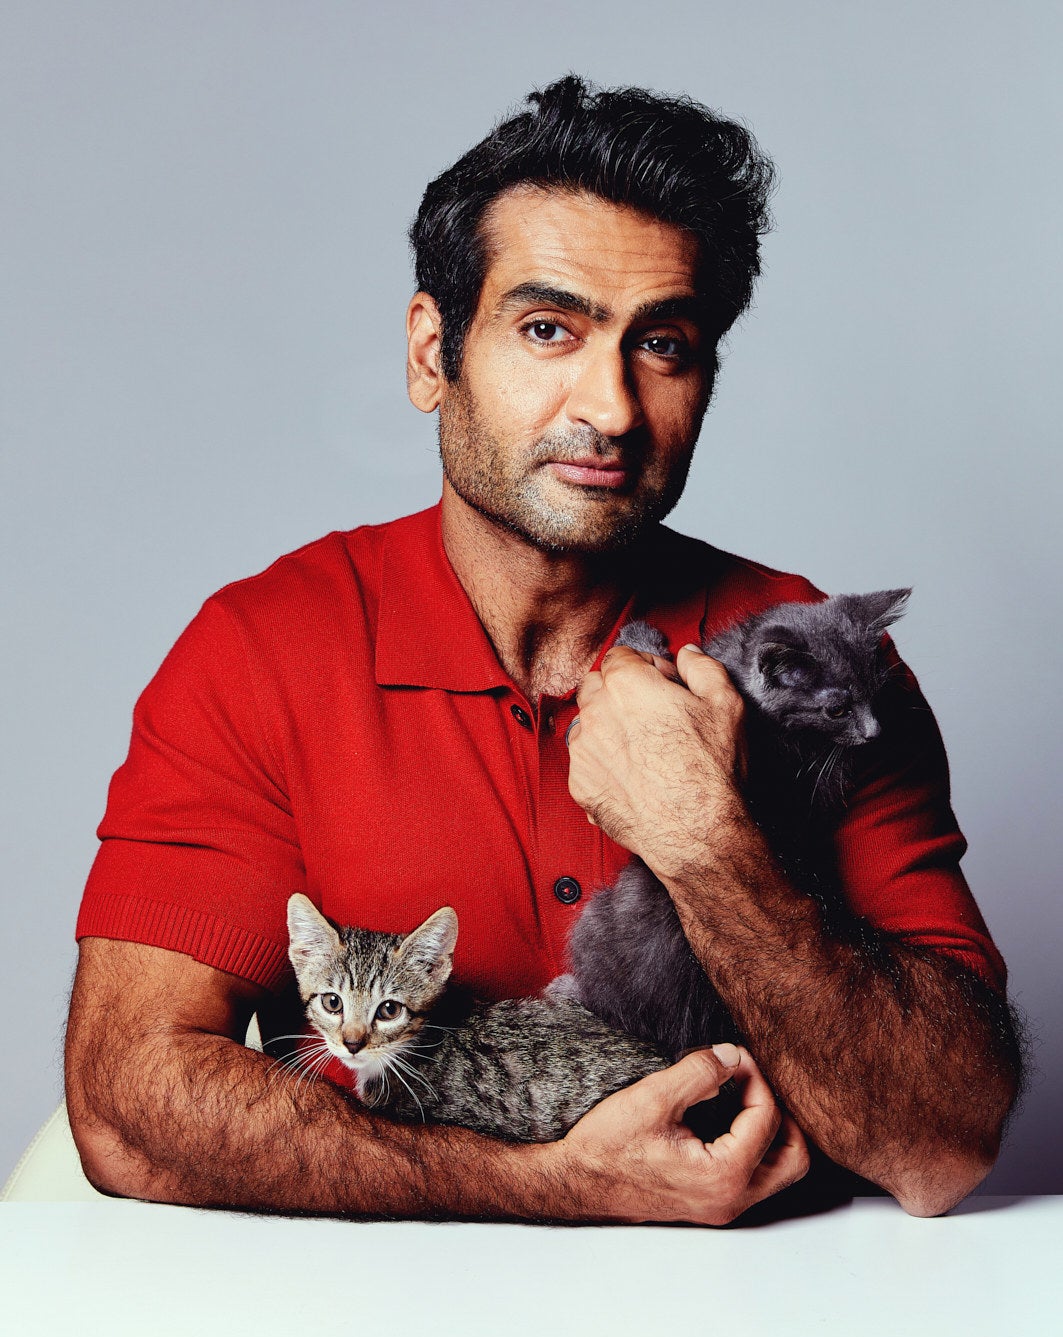 Kumail holding two kittens